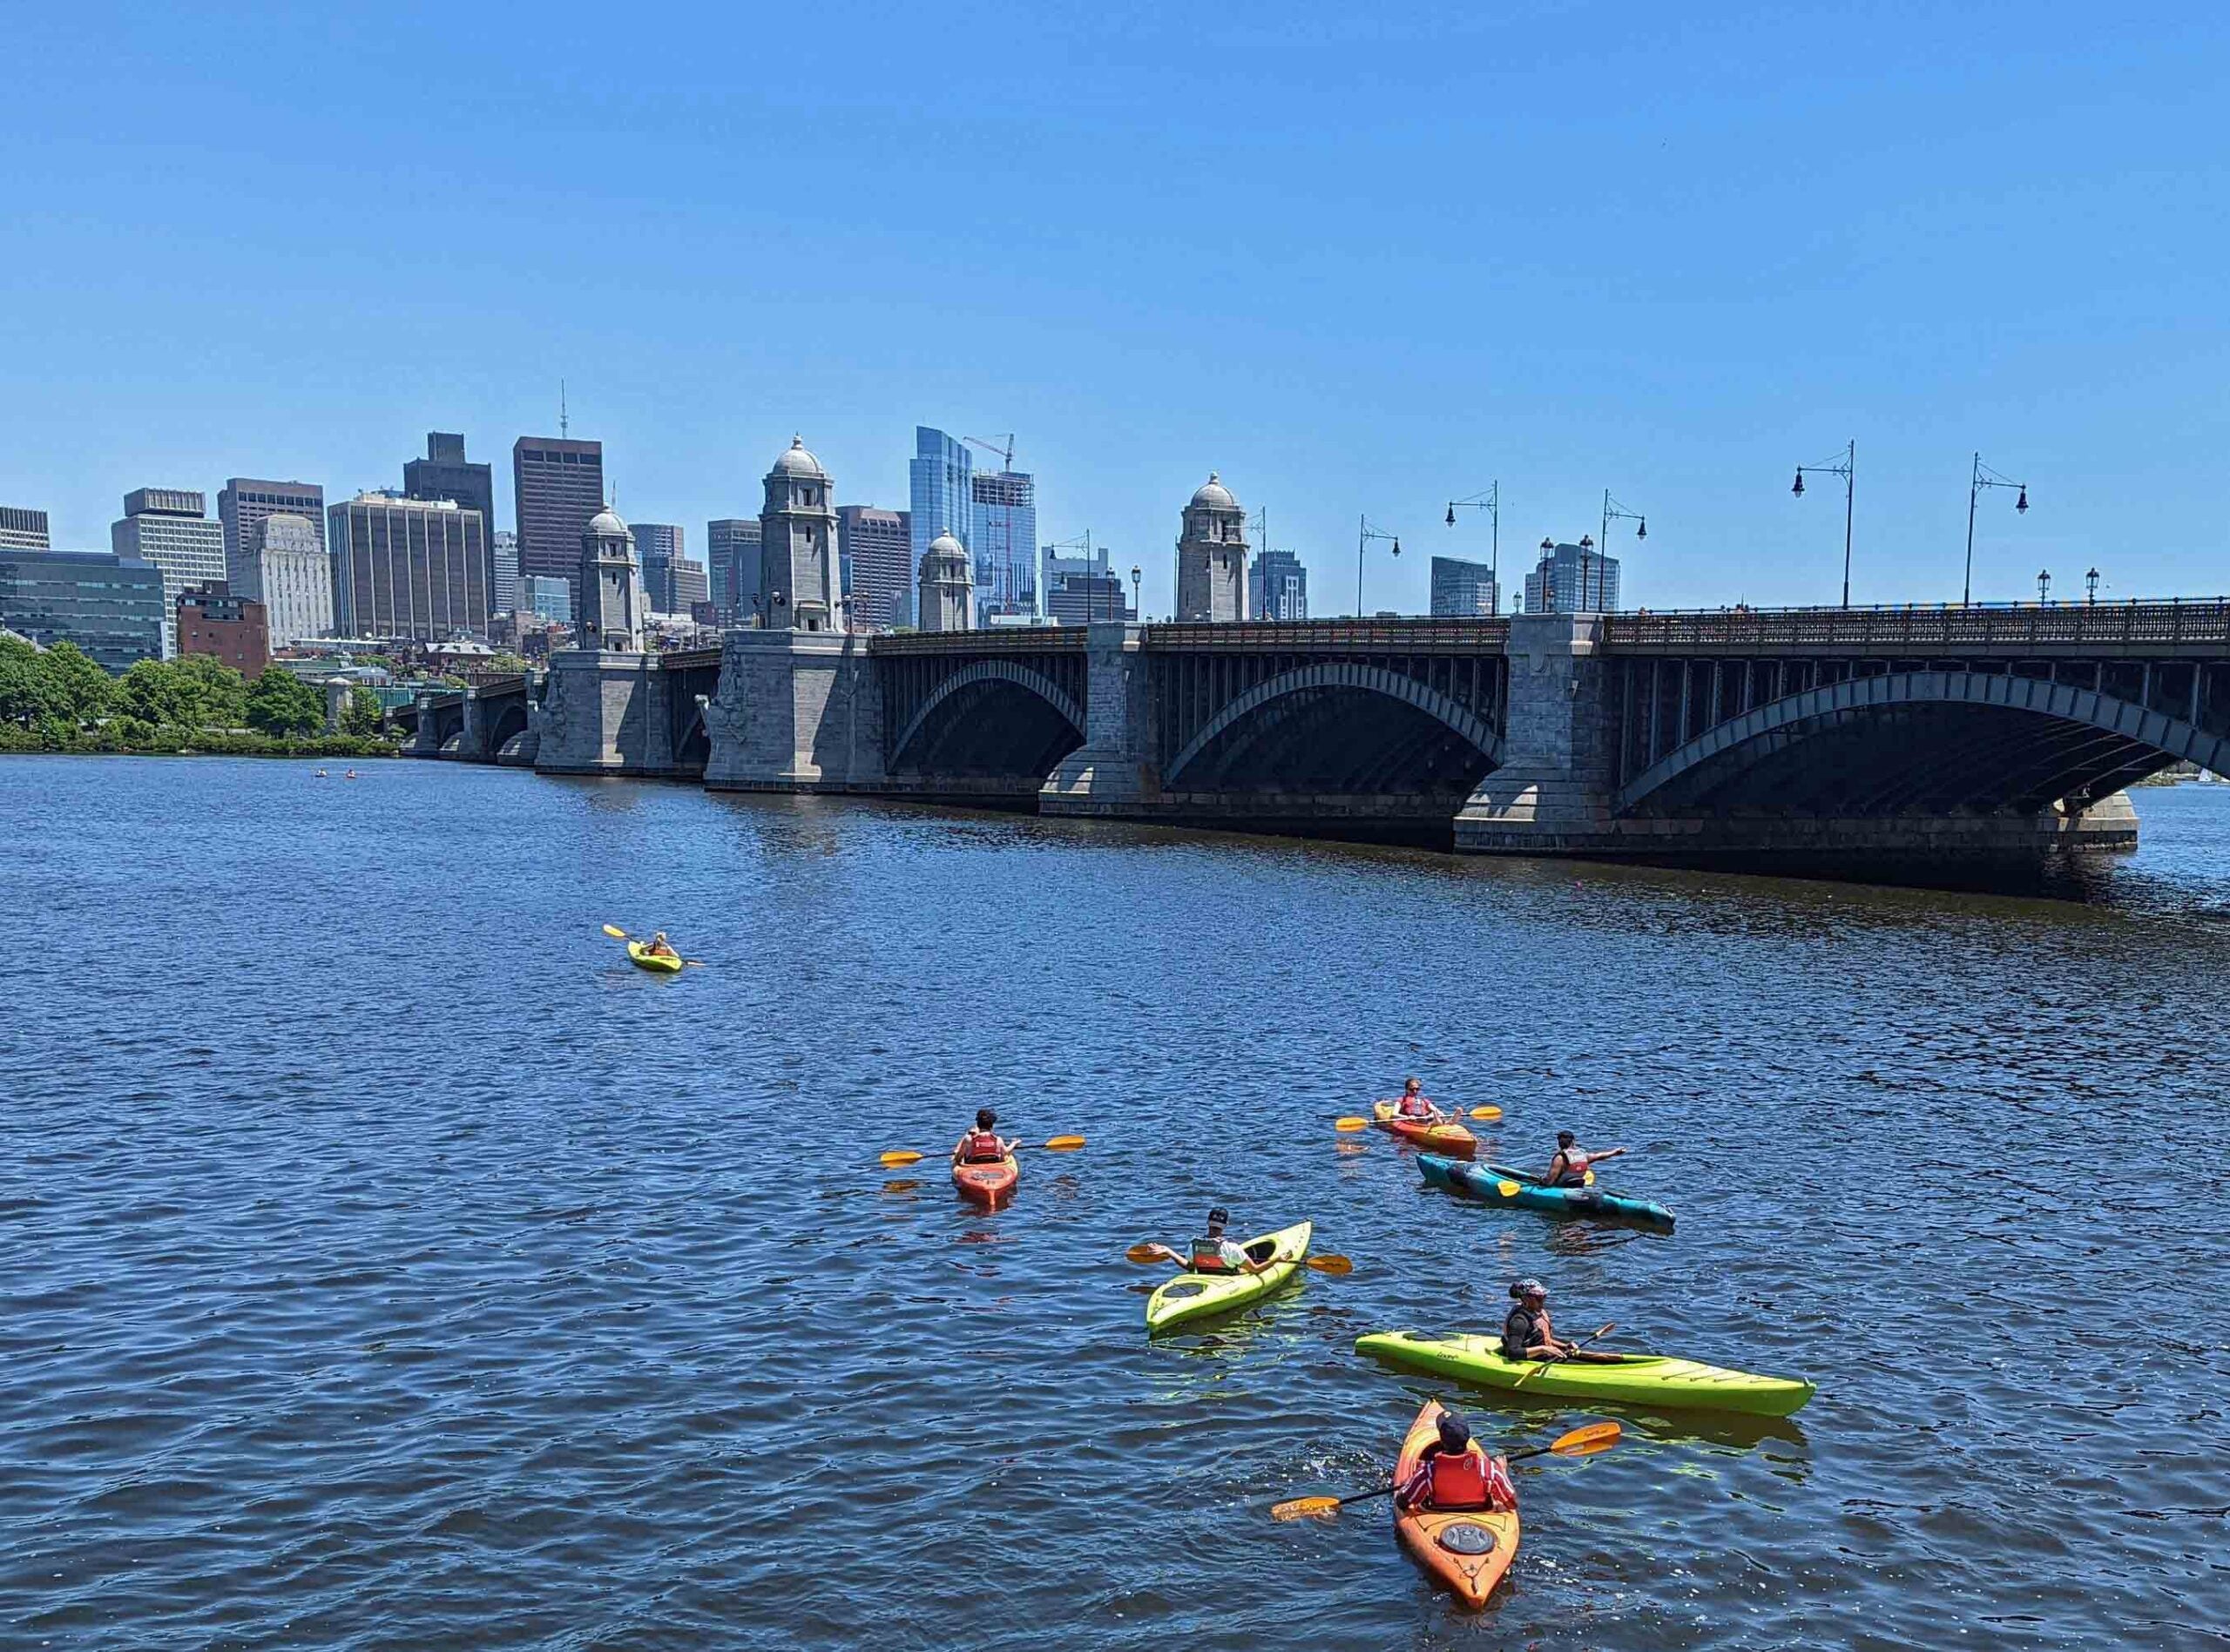 How clean are the Charles, Neponset, and Mystic Rivers?